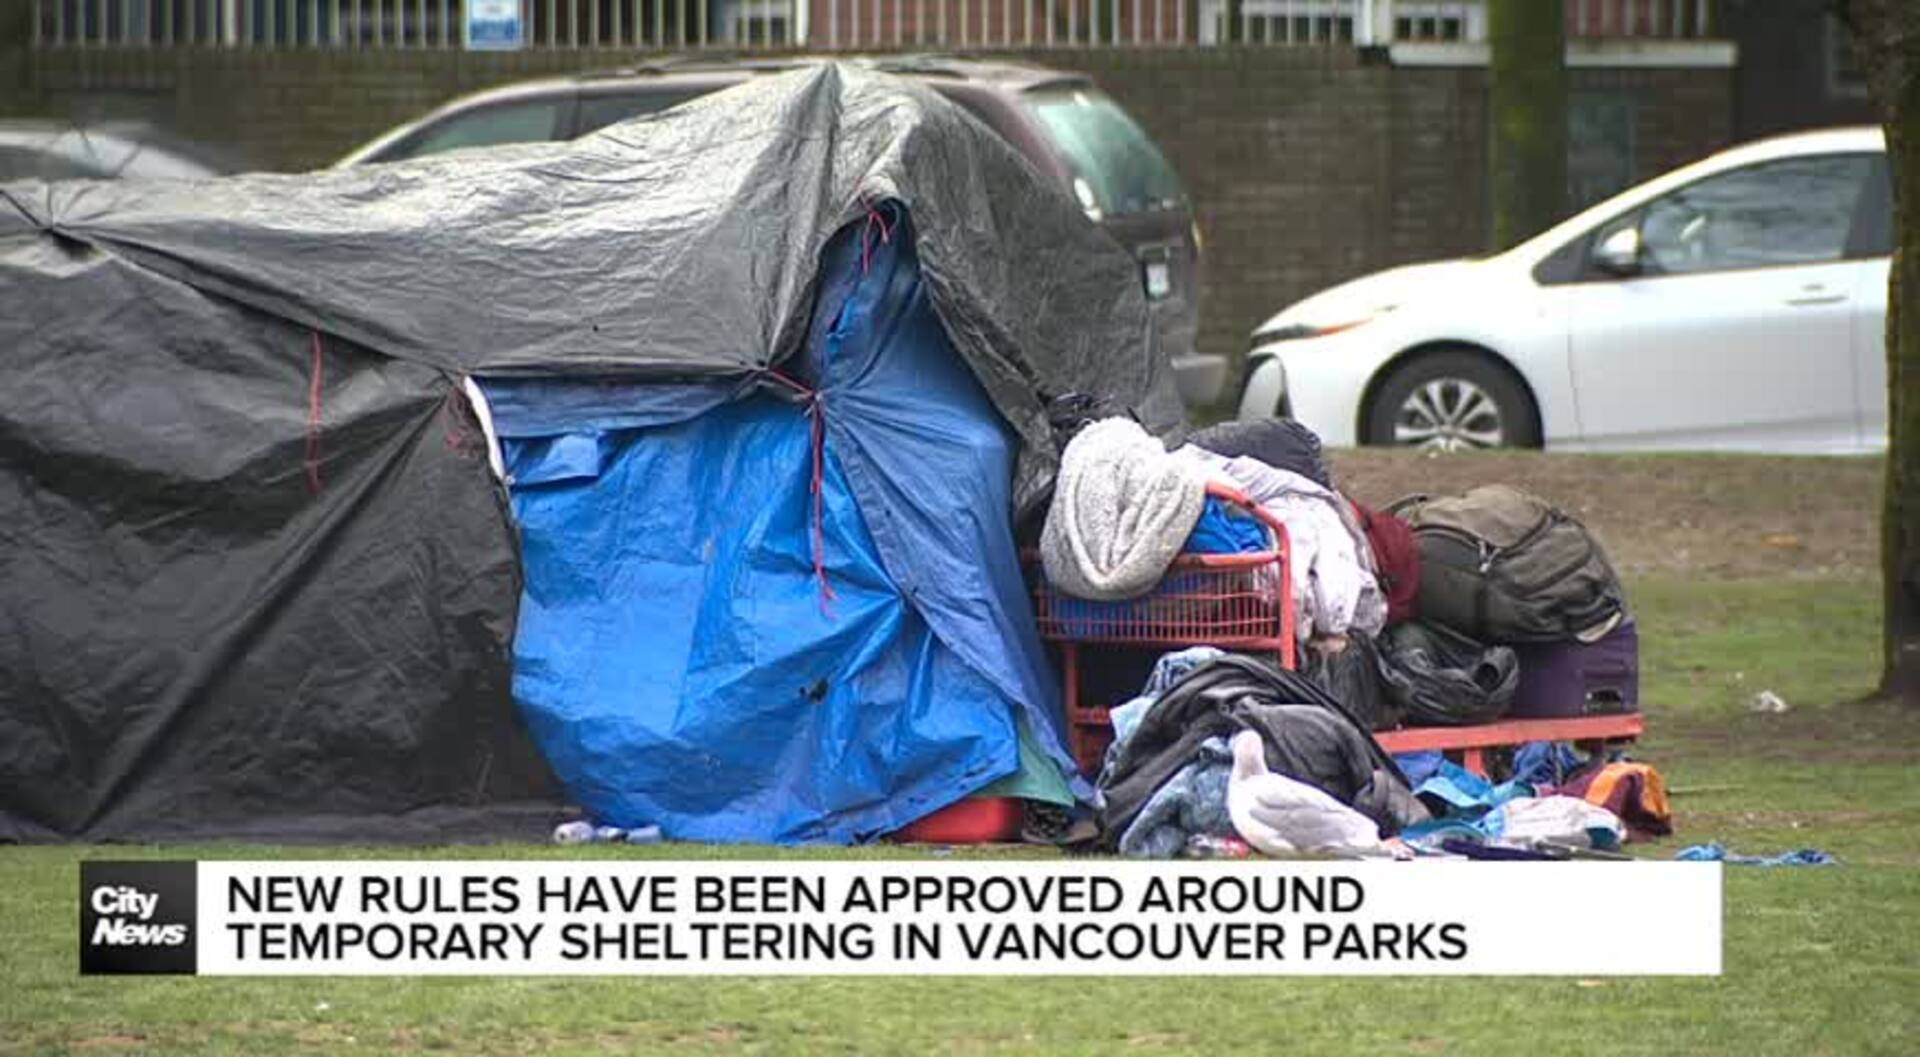 Vancouver Park Board passes new rules around sheltering in parks